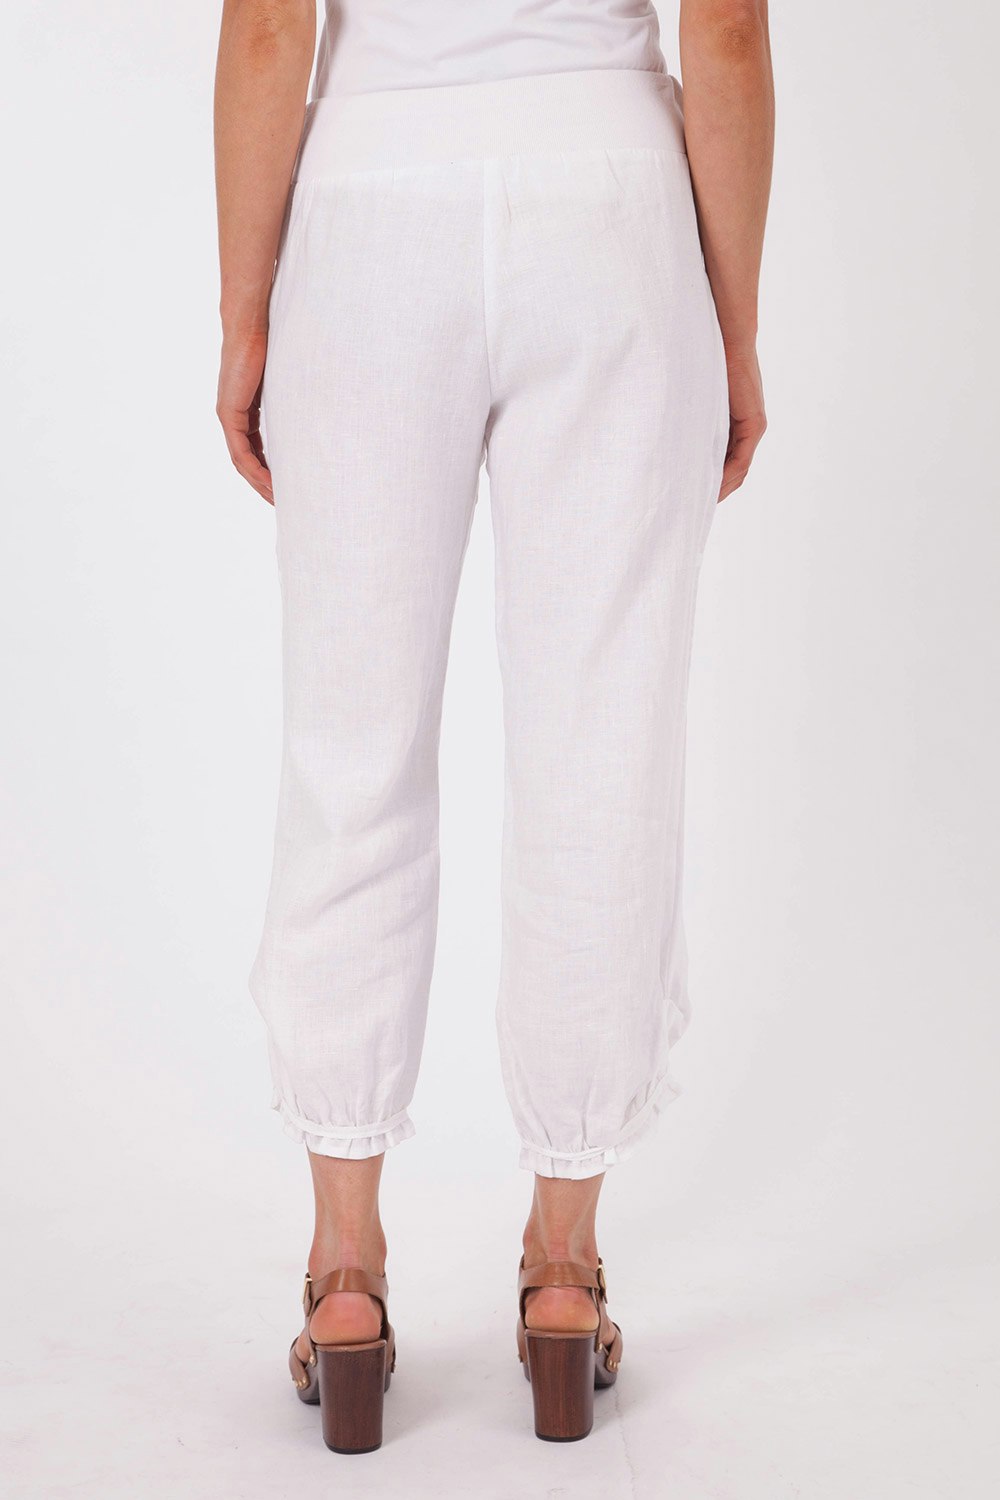 Marco Polo clothing Cropped Relaxed Linen Pant - Womens Pants at Birdsnest